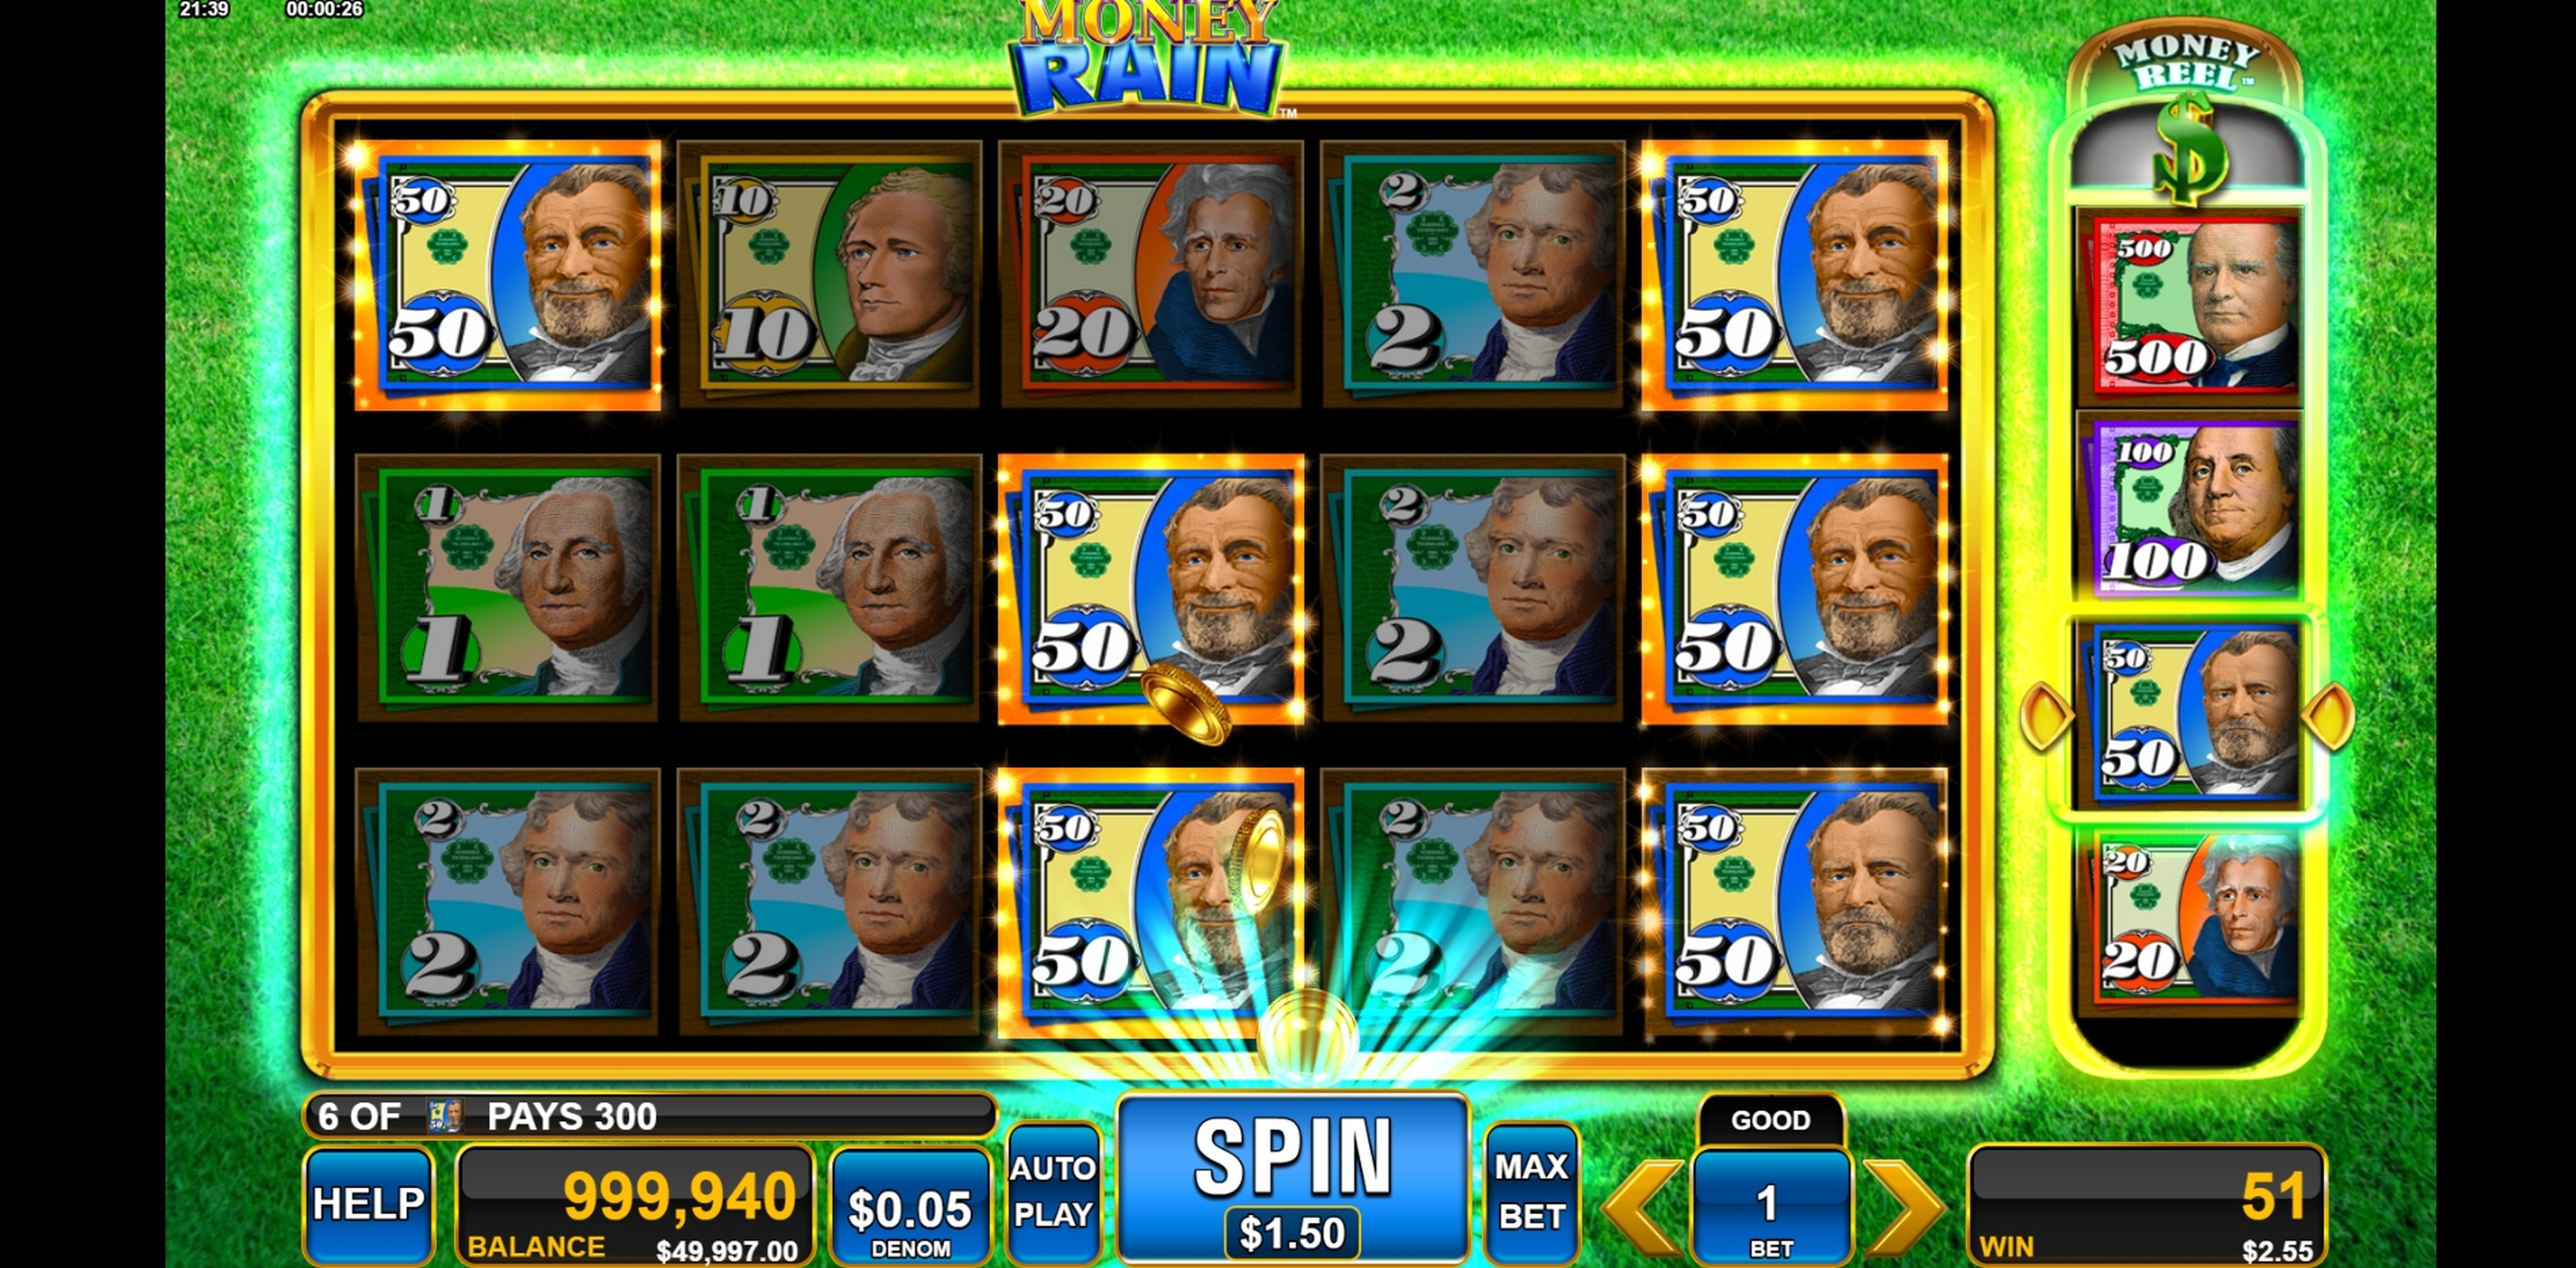 Win Money in Money Rain Free Slot Game by Incredible Technologies